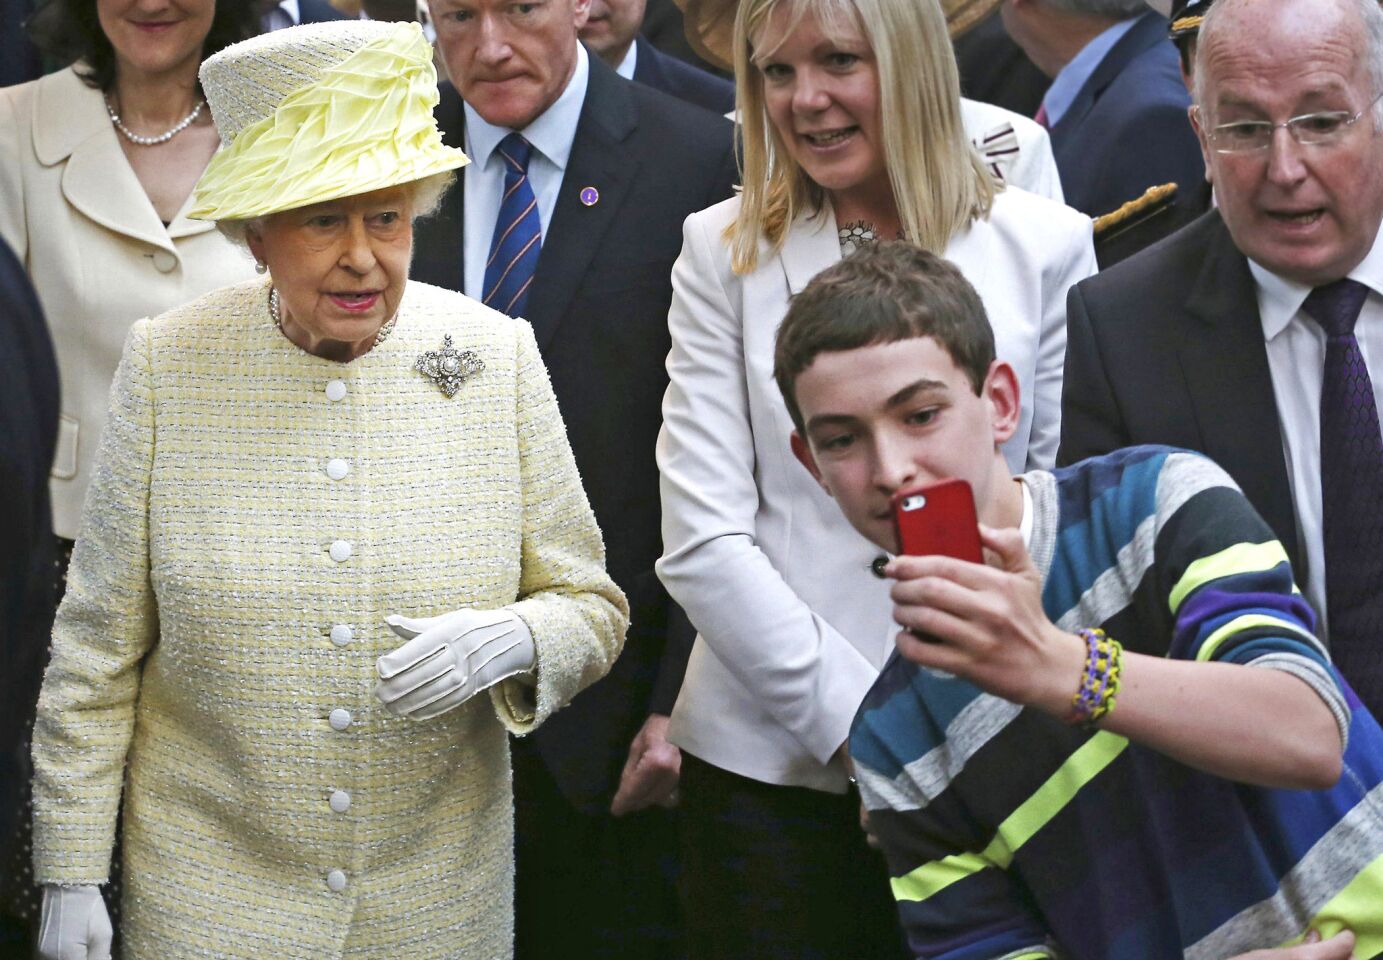 A youth takes a selfie photograph in front of Queen Elizabeth II earlier this year. On Sept. 9, the queen is expected to become the longest-reigning monarch in British history -- more than 63 years on the throne.